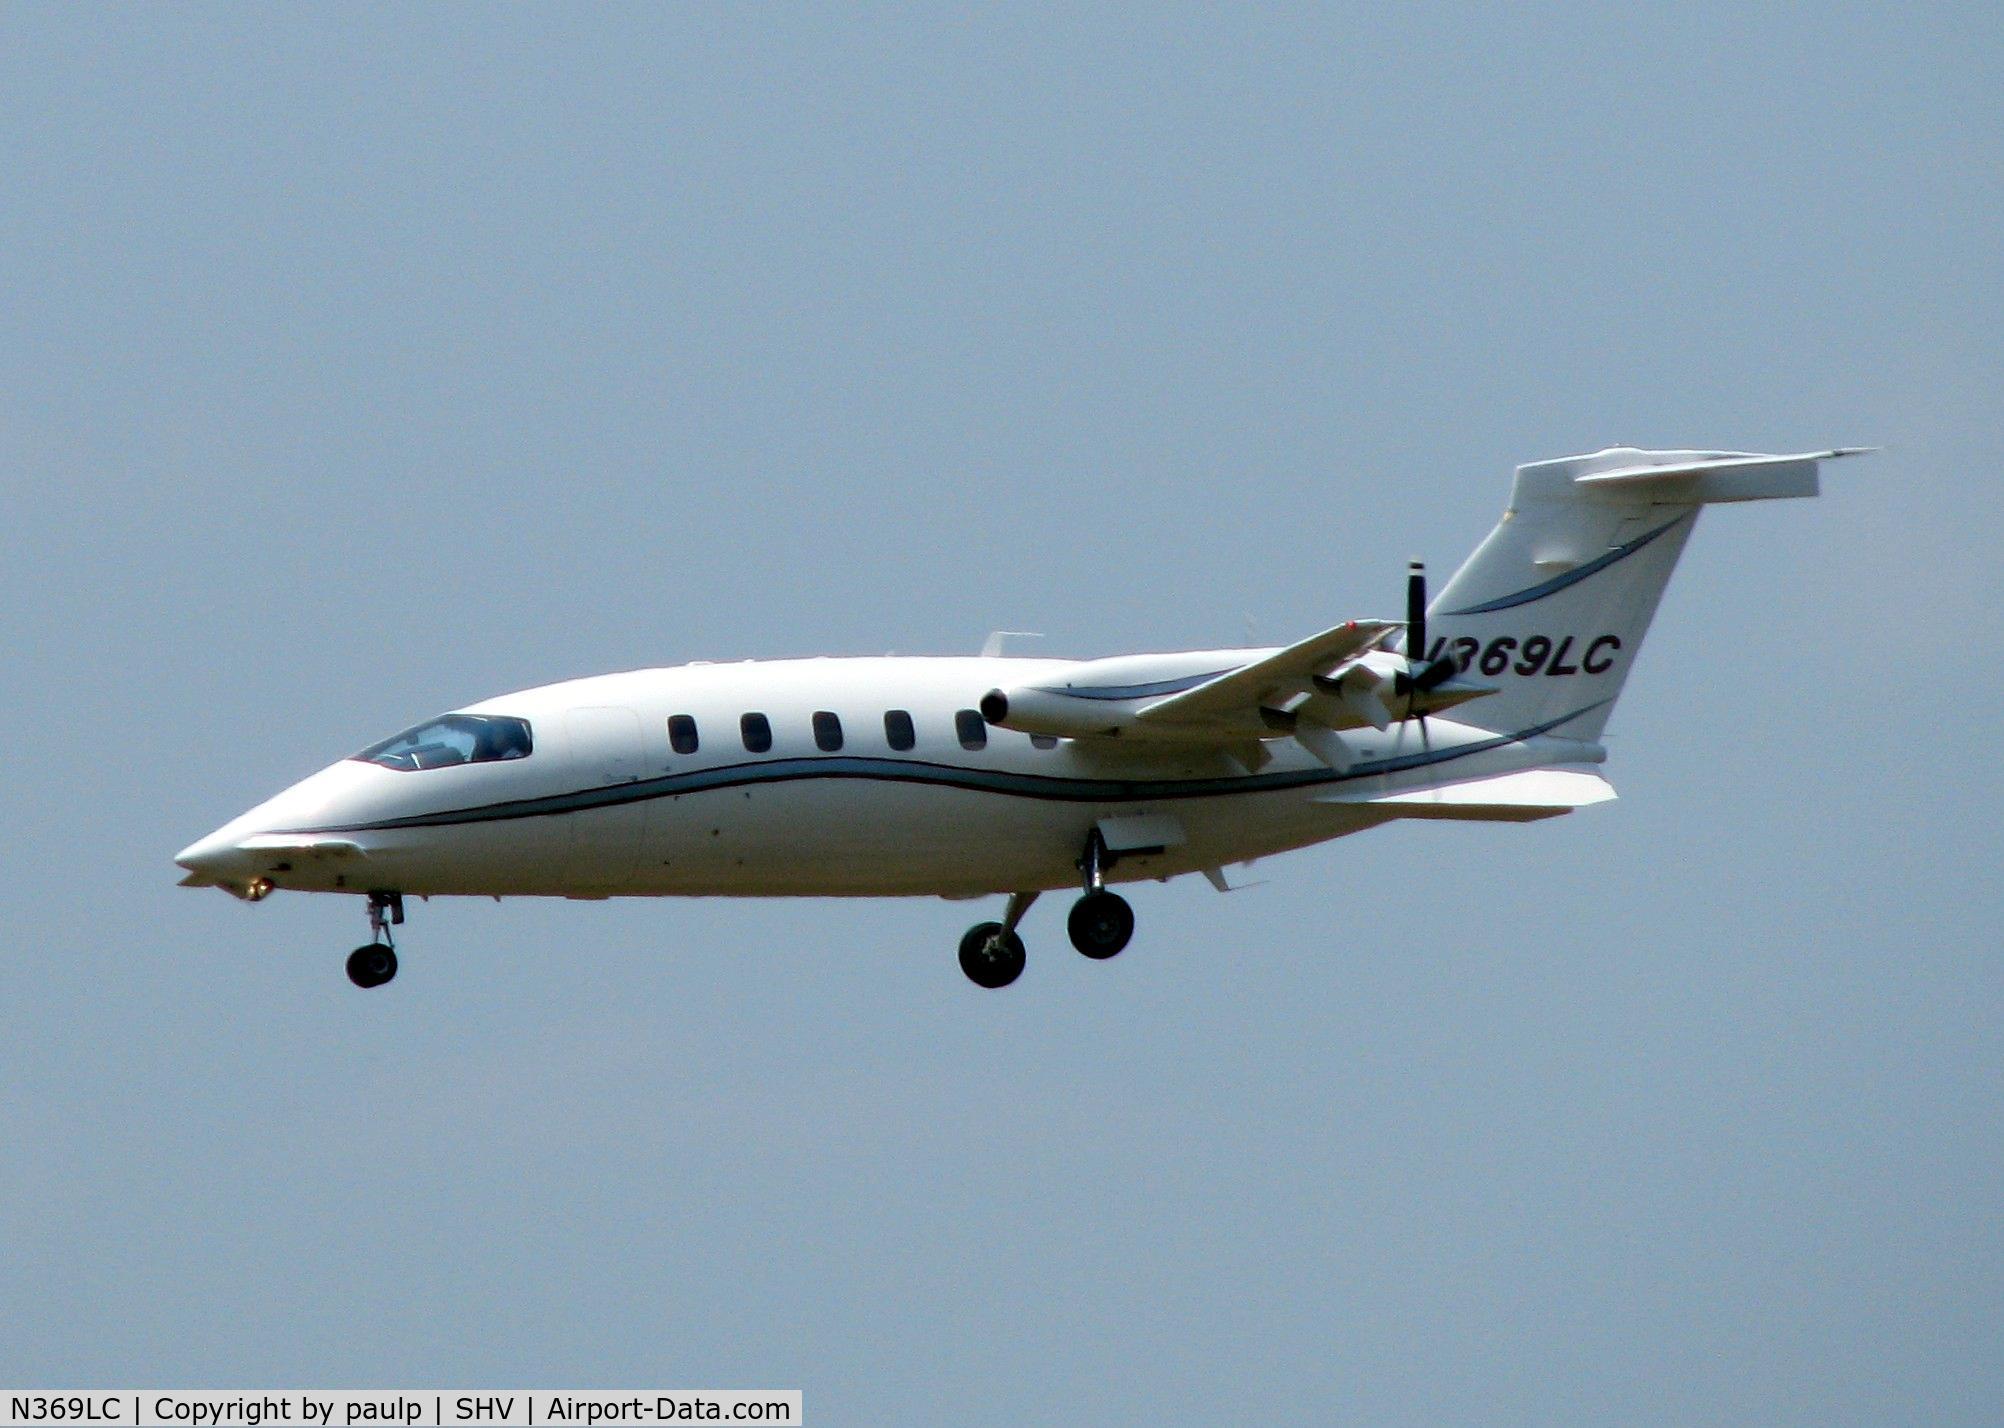 N369LC, 2008 Piaggio P-180 C/N 1154, Same shot, different day at Shreveport Regional.